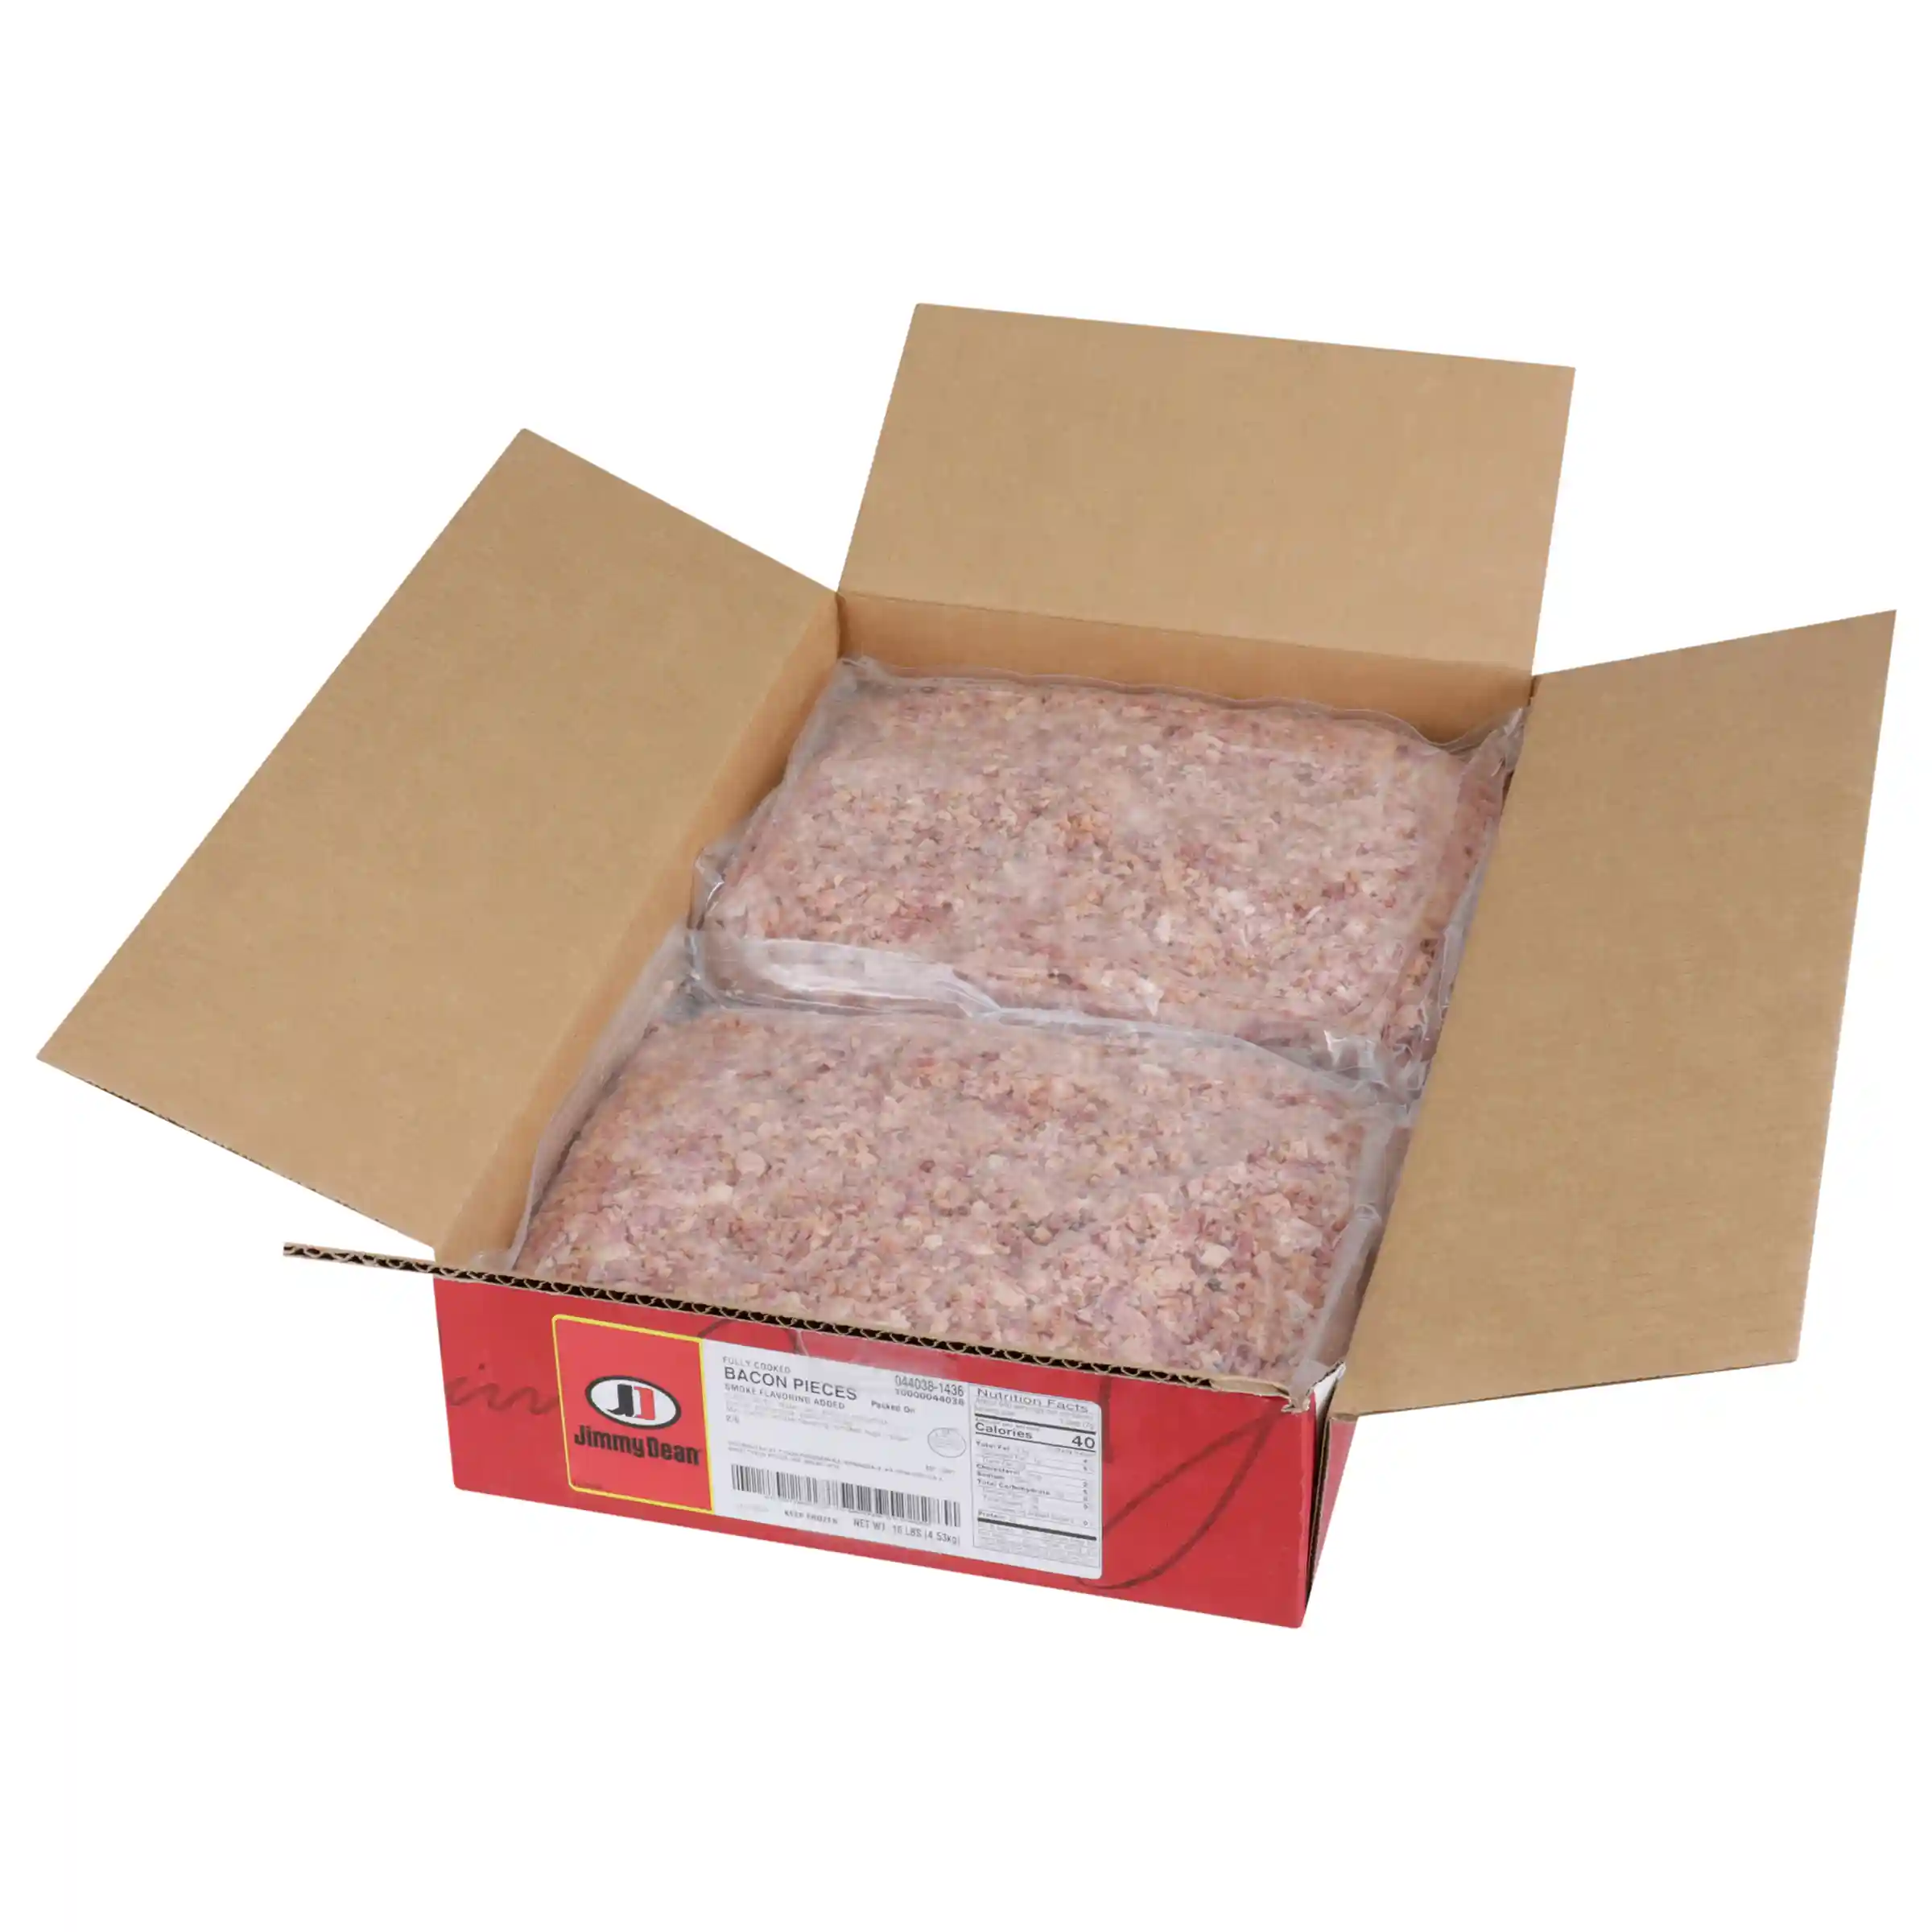 Jimmy Dean® Fully Cooked Hardwood Smoked Regular Cooked Bacon Pieces_image_21